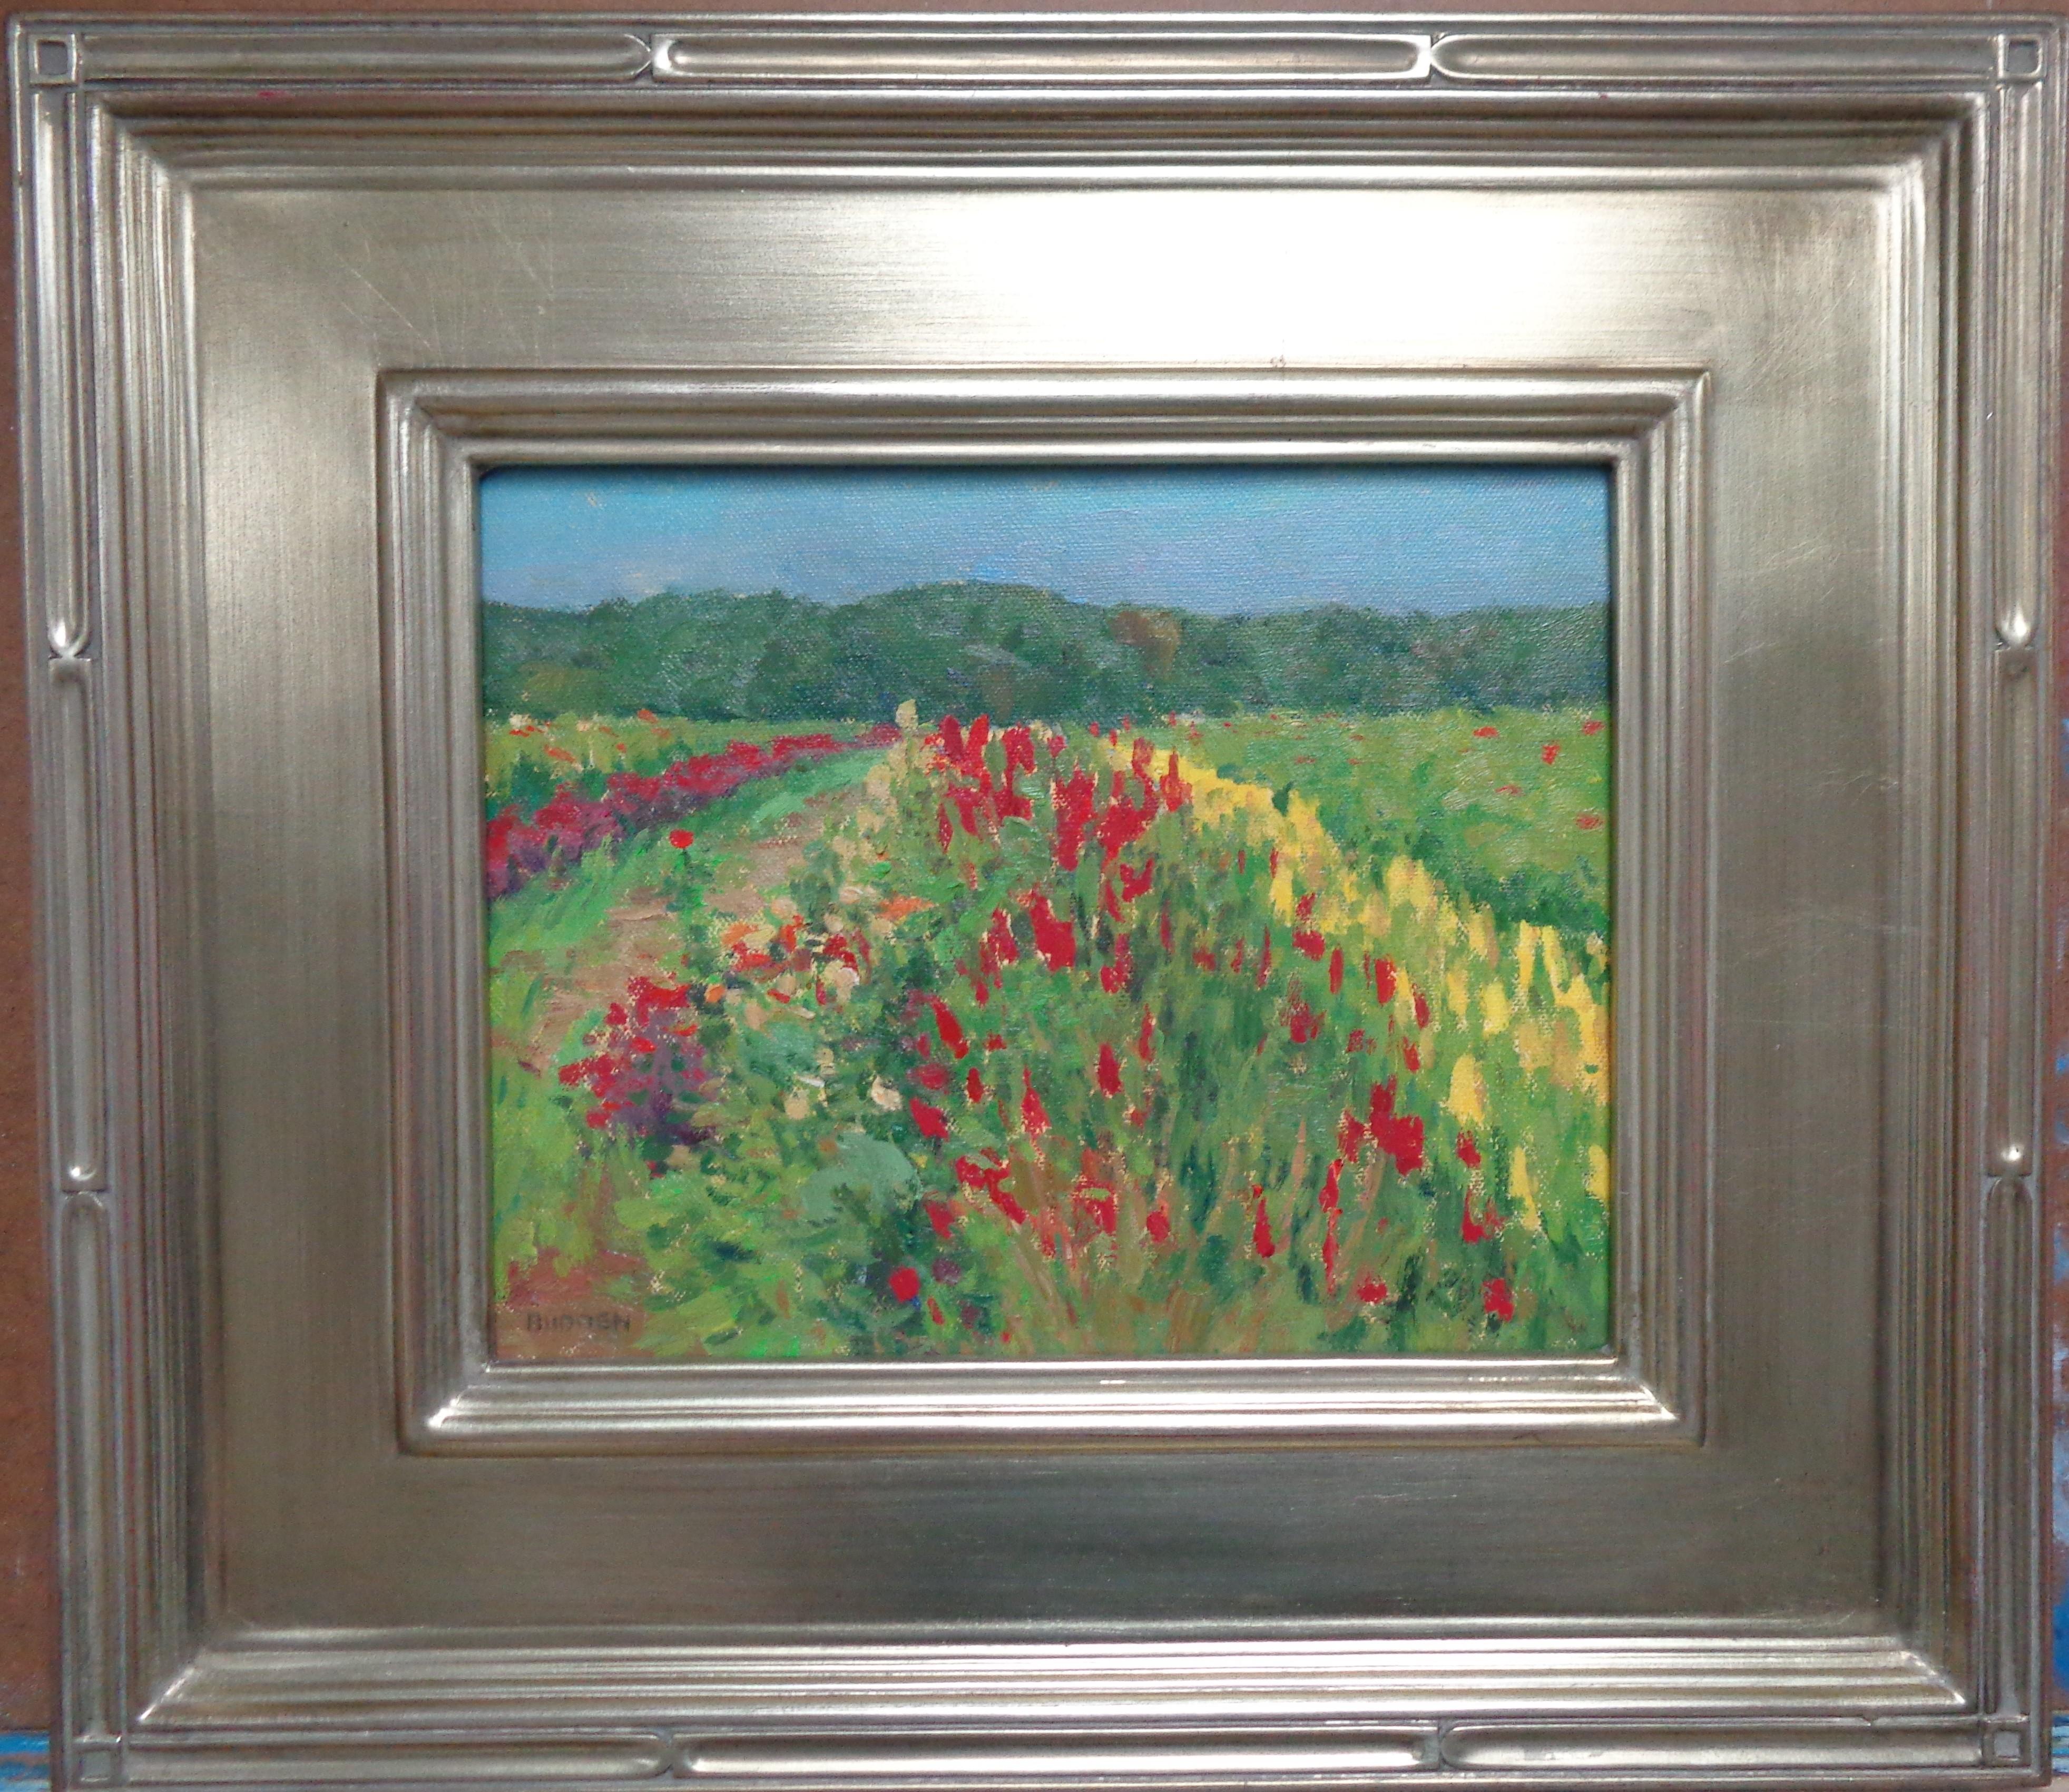 Summer Field
8 x 10 image
Summer Fields I is an oil painting on canvas that showcases the beautiful light of a summer day shinning on a beautiful field of flowers. This painting was painted en plein air on location in an Impressionistic style and is